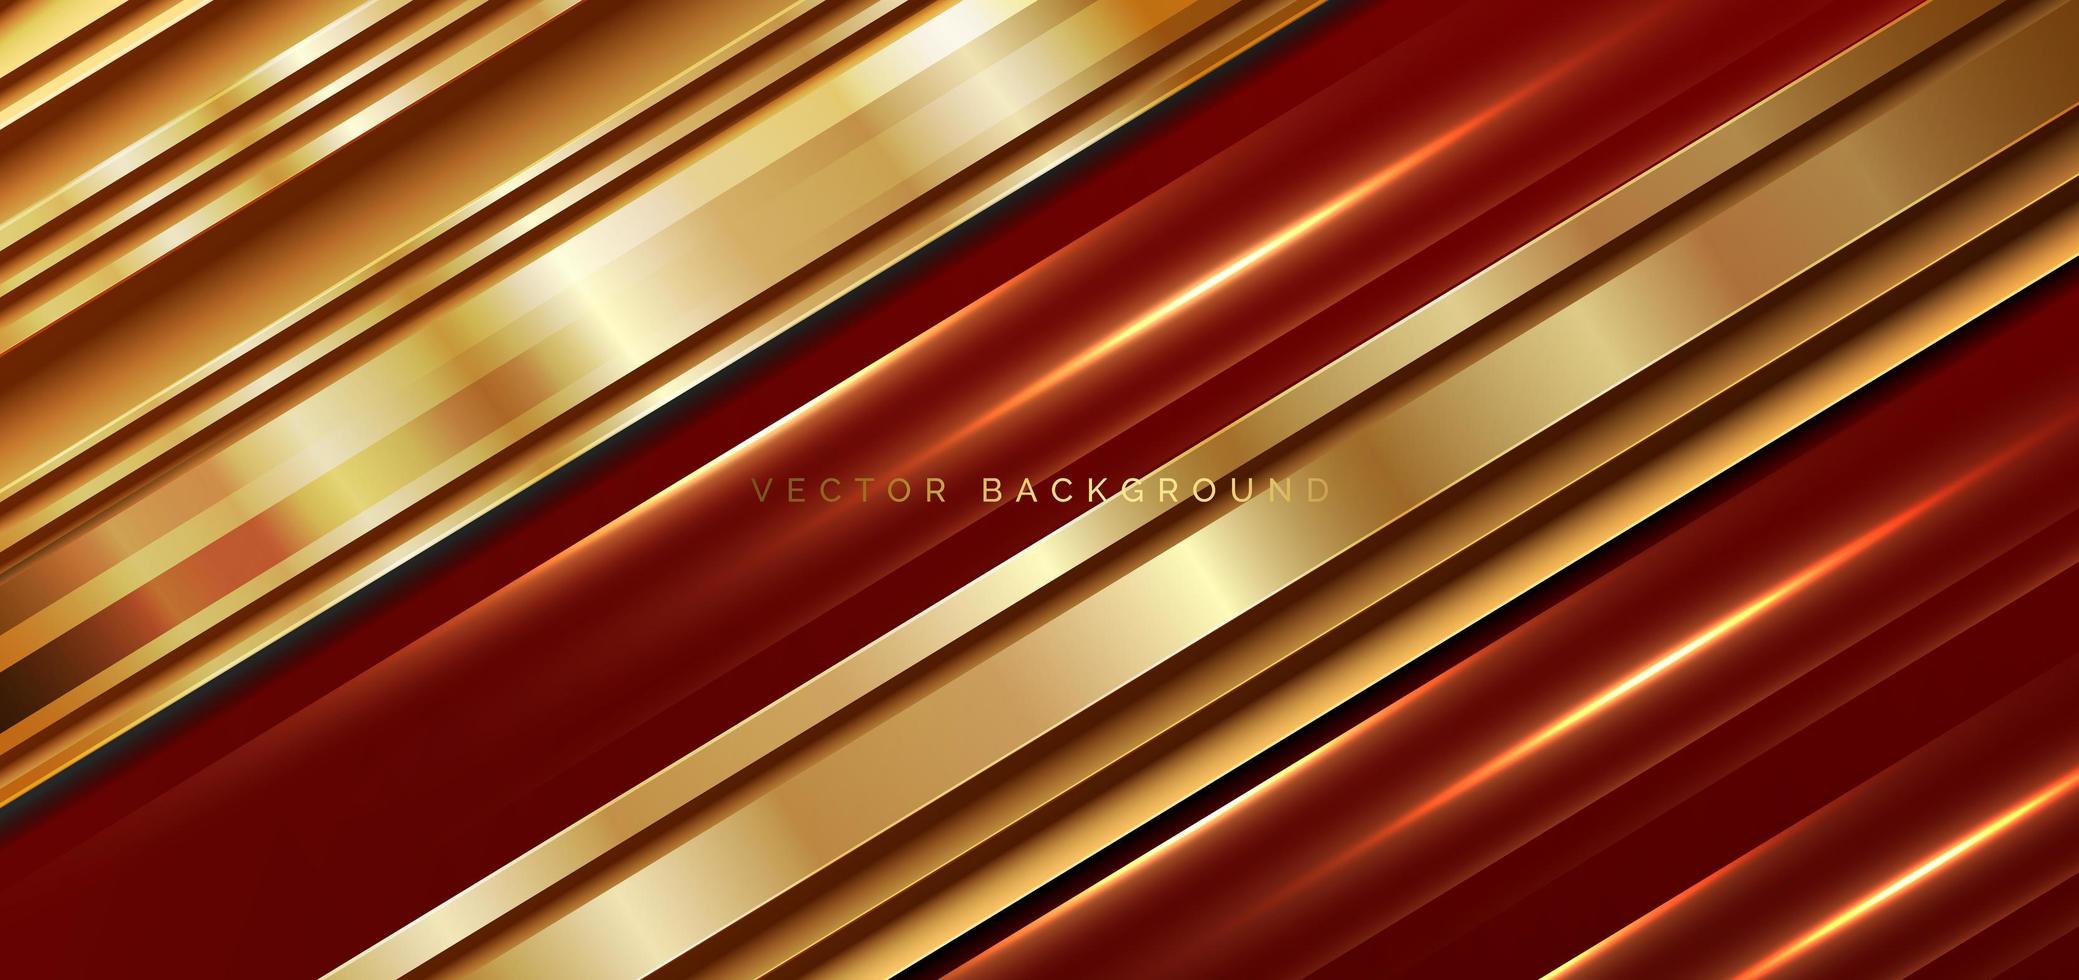 Abstract 3d luxury red background with diagonal geometric glowing golden effect lines. vector